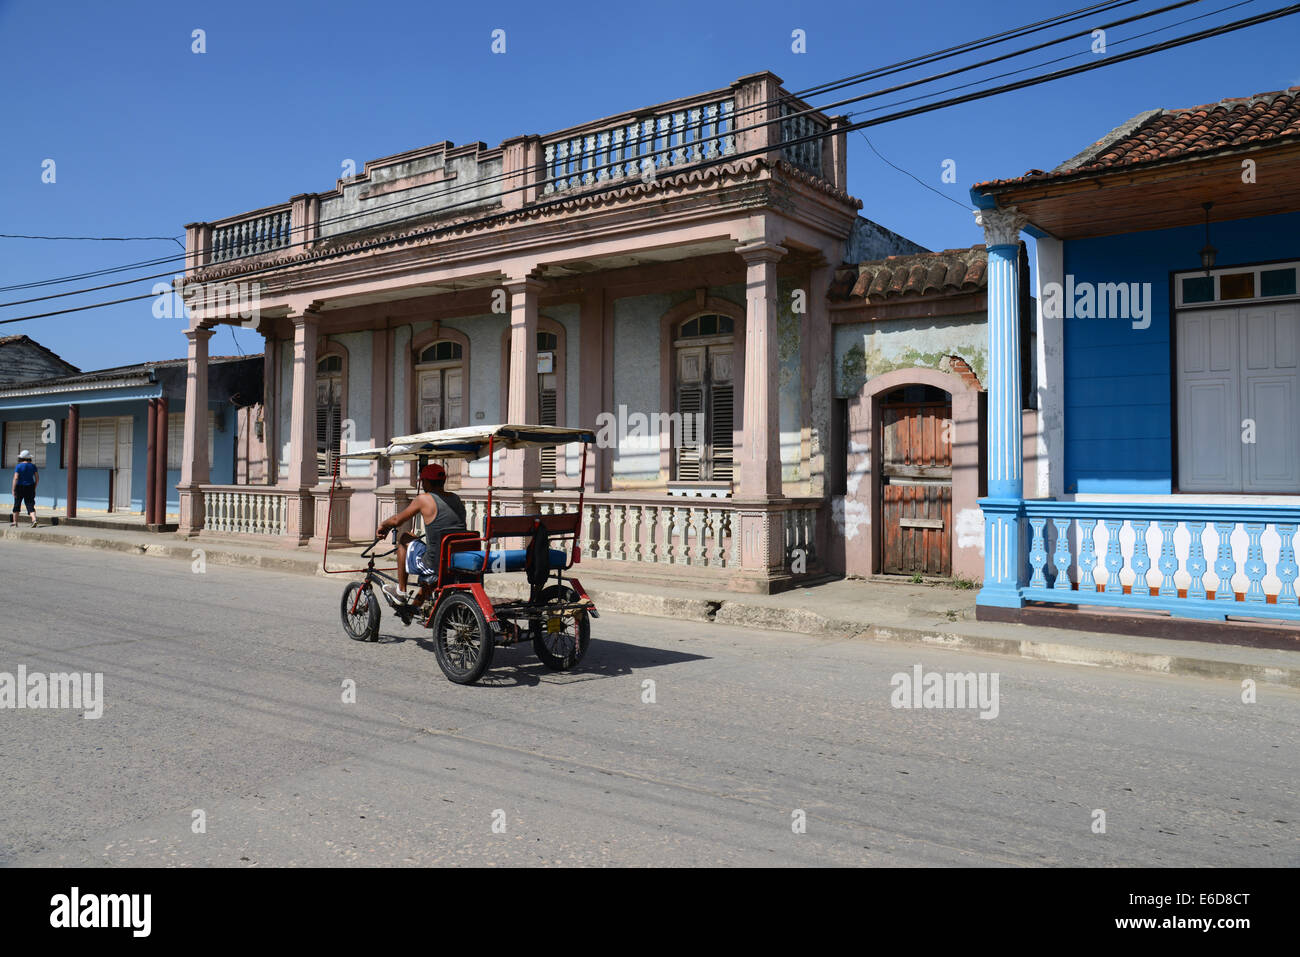 Typical ricksaw-style bicycle taxi in main street in Baracoa, eastern Cuba, in front of a typical oldcoonial-style building. Stock Photo